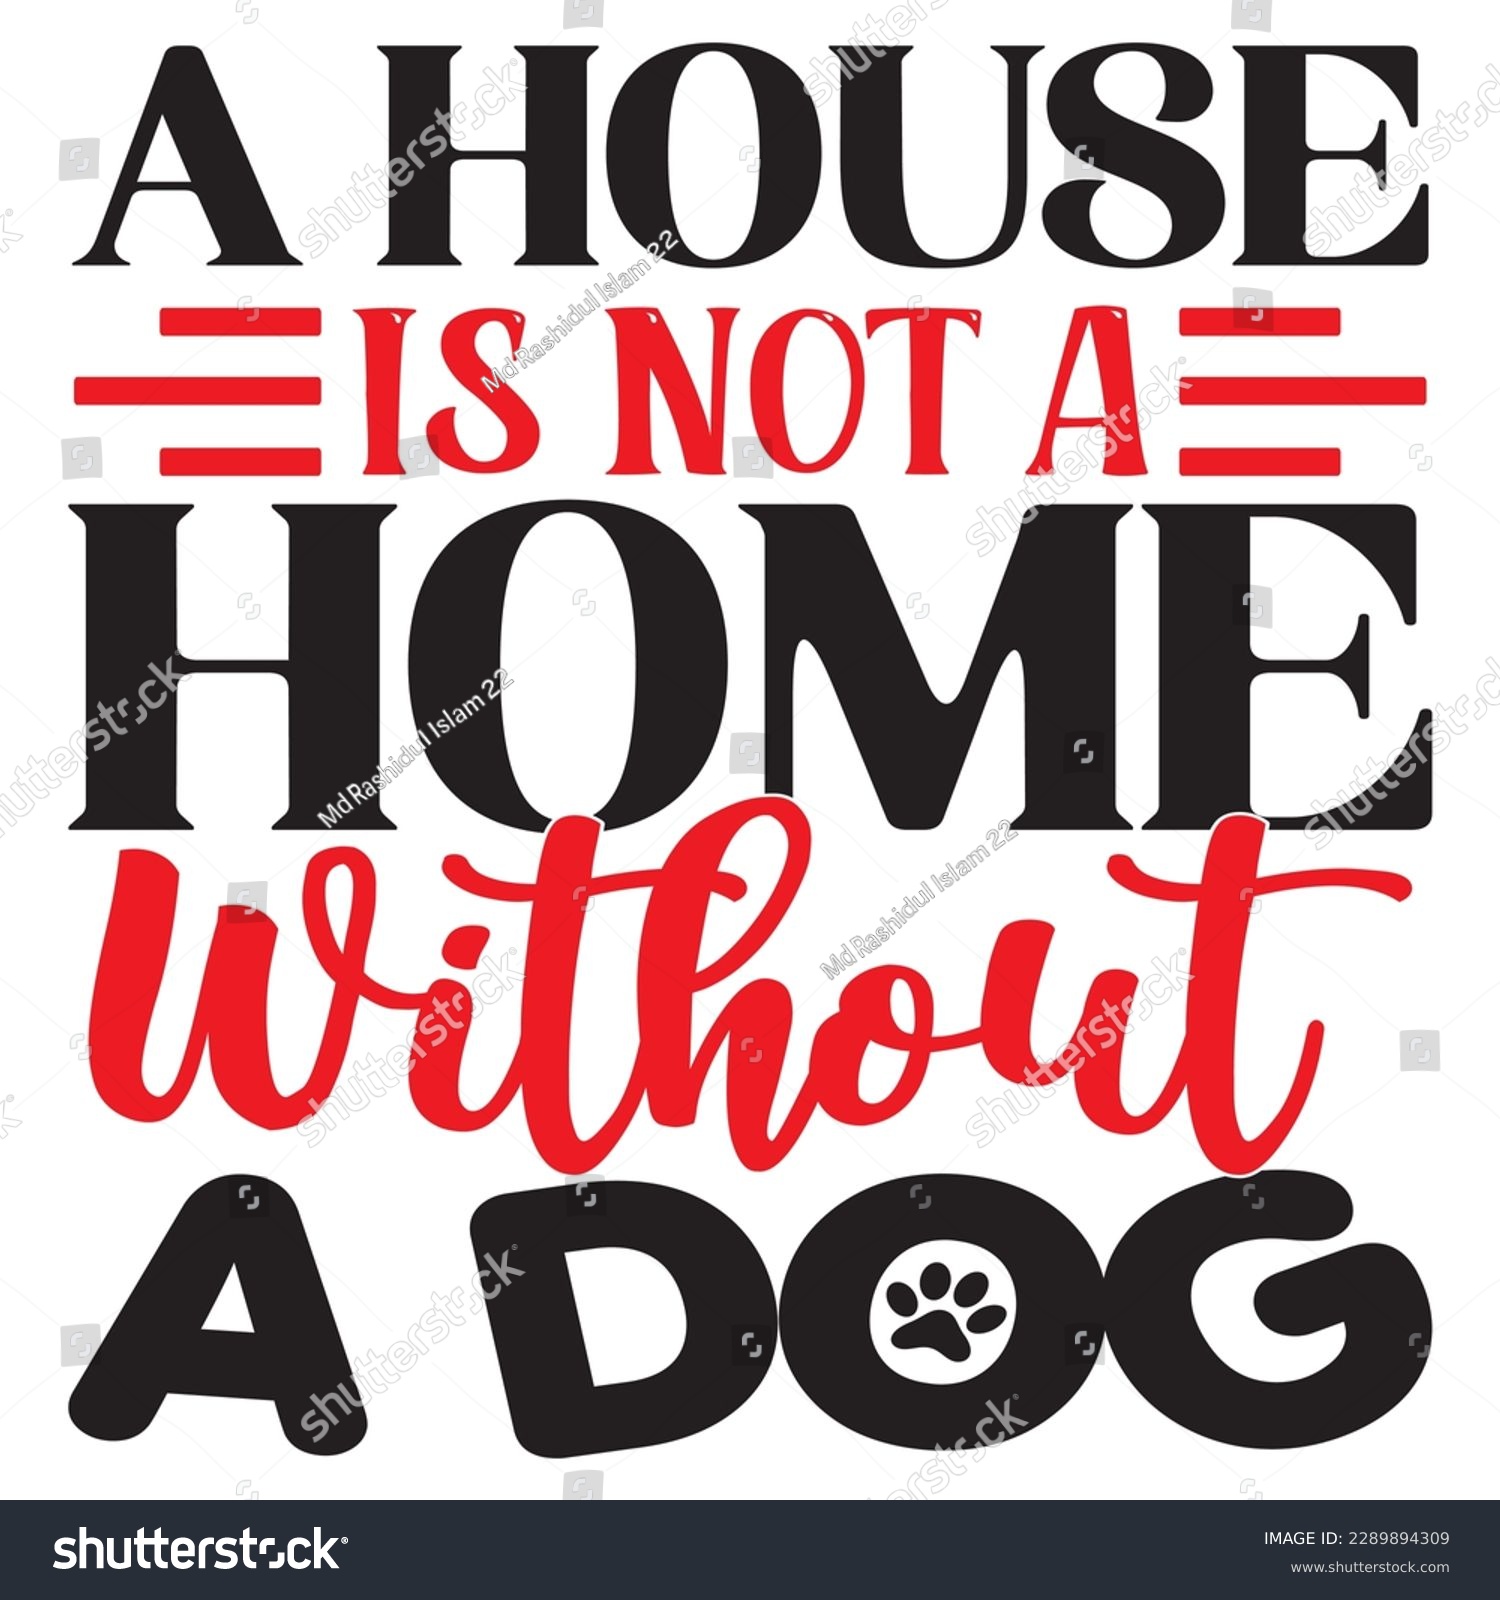 SVG of A House Is Not A Home Without A Dog SVG Design Vector File. svg